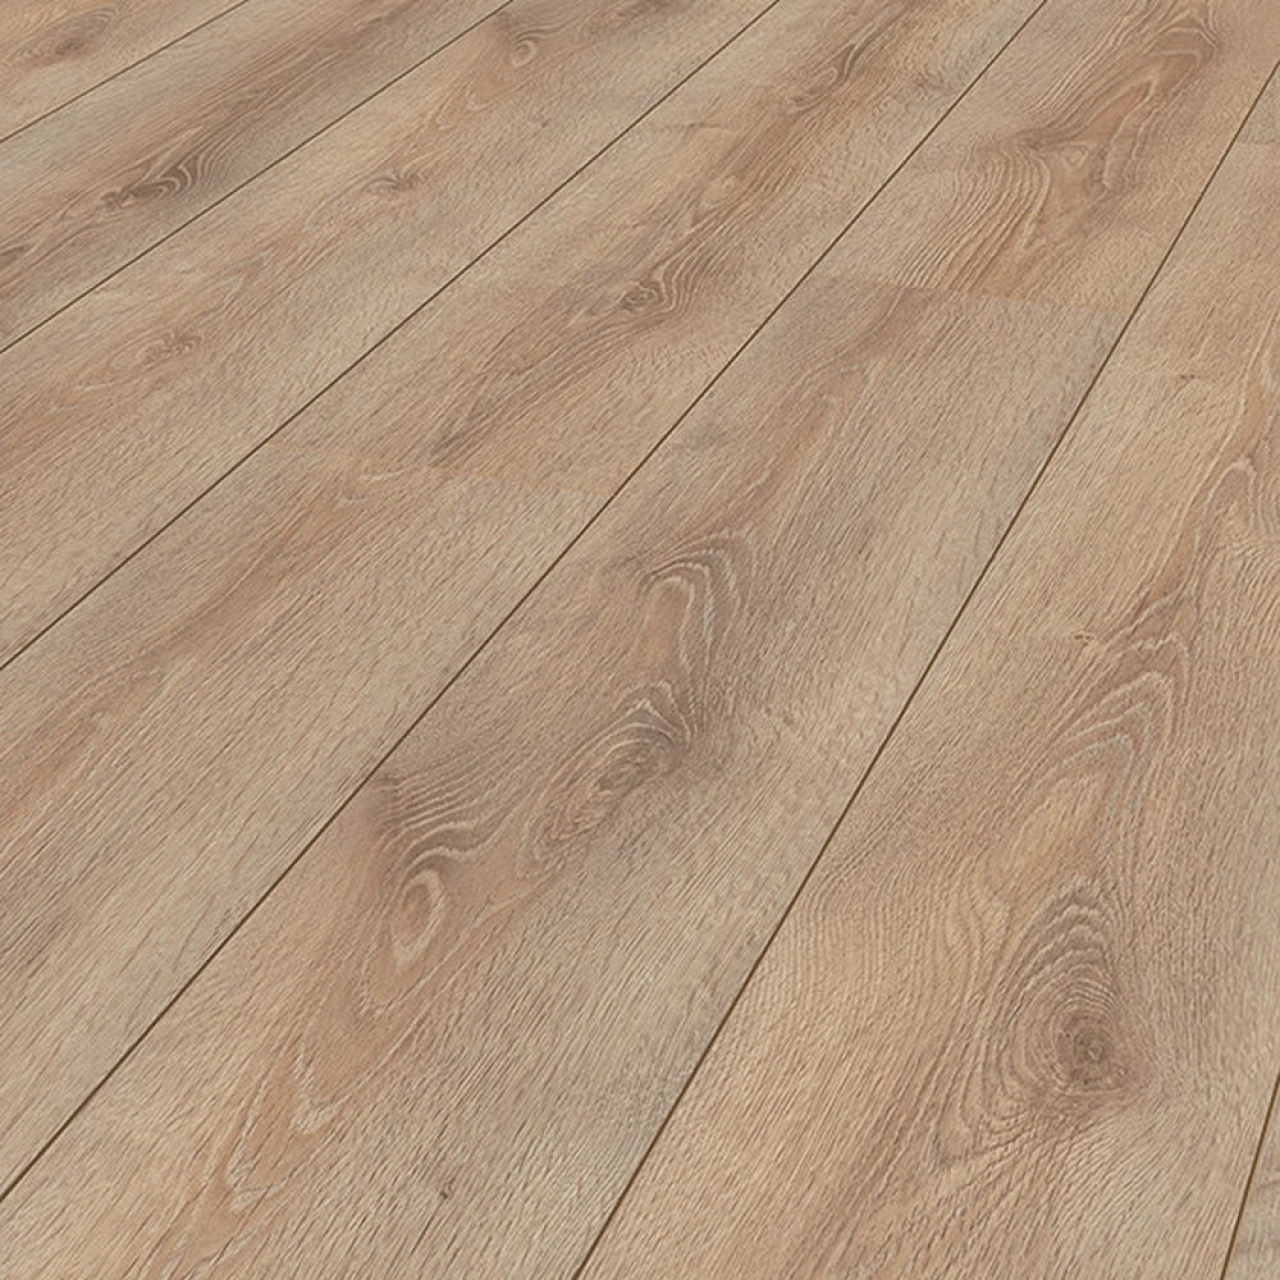 Krono Variostep Classic, Clearwater Oak, 8 mm